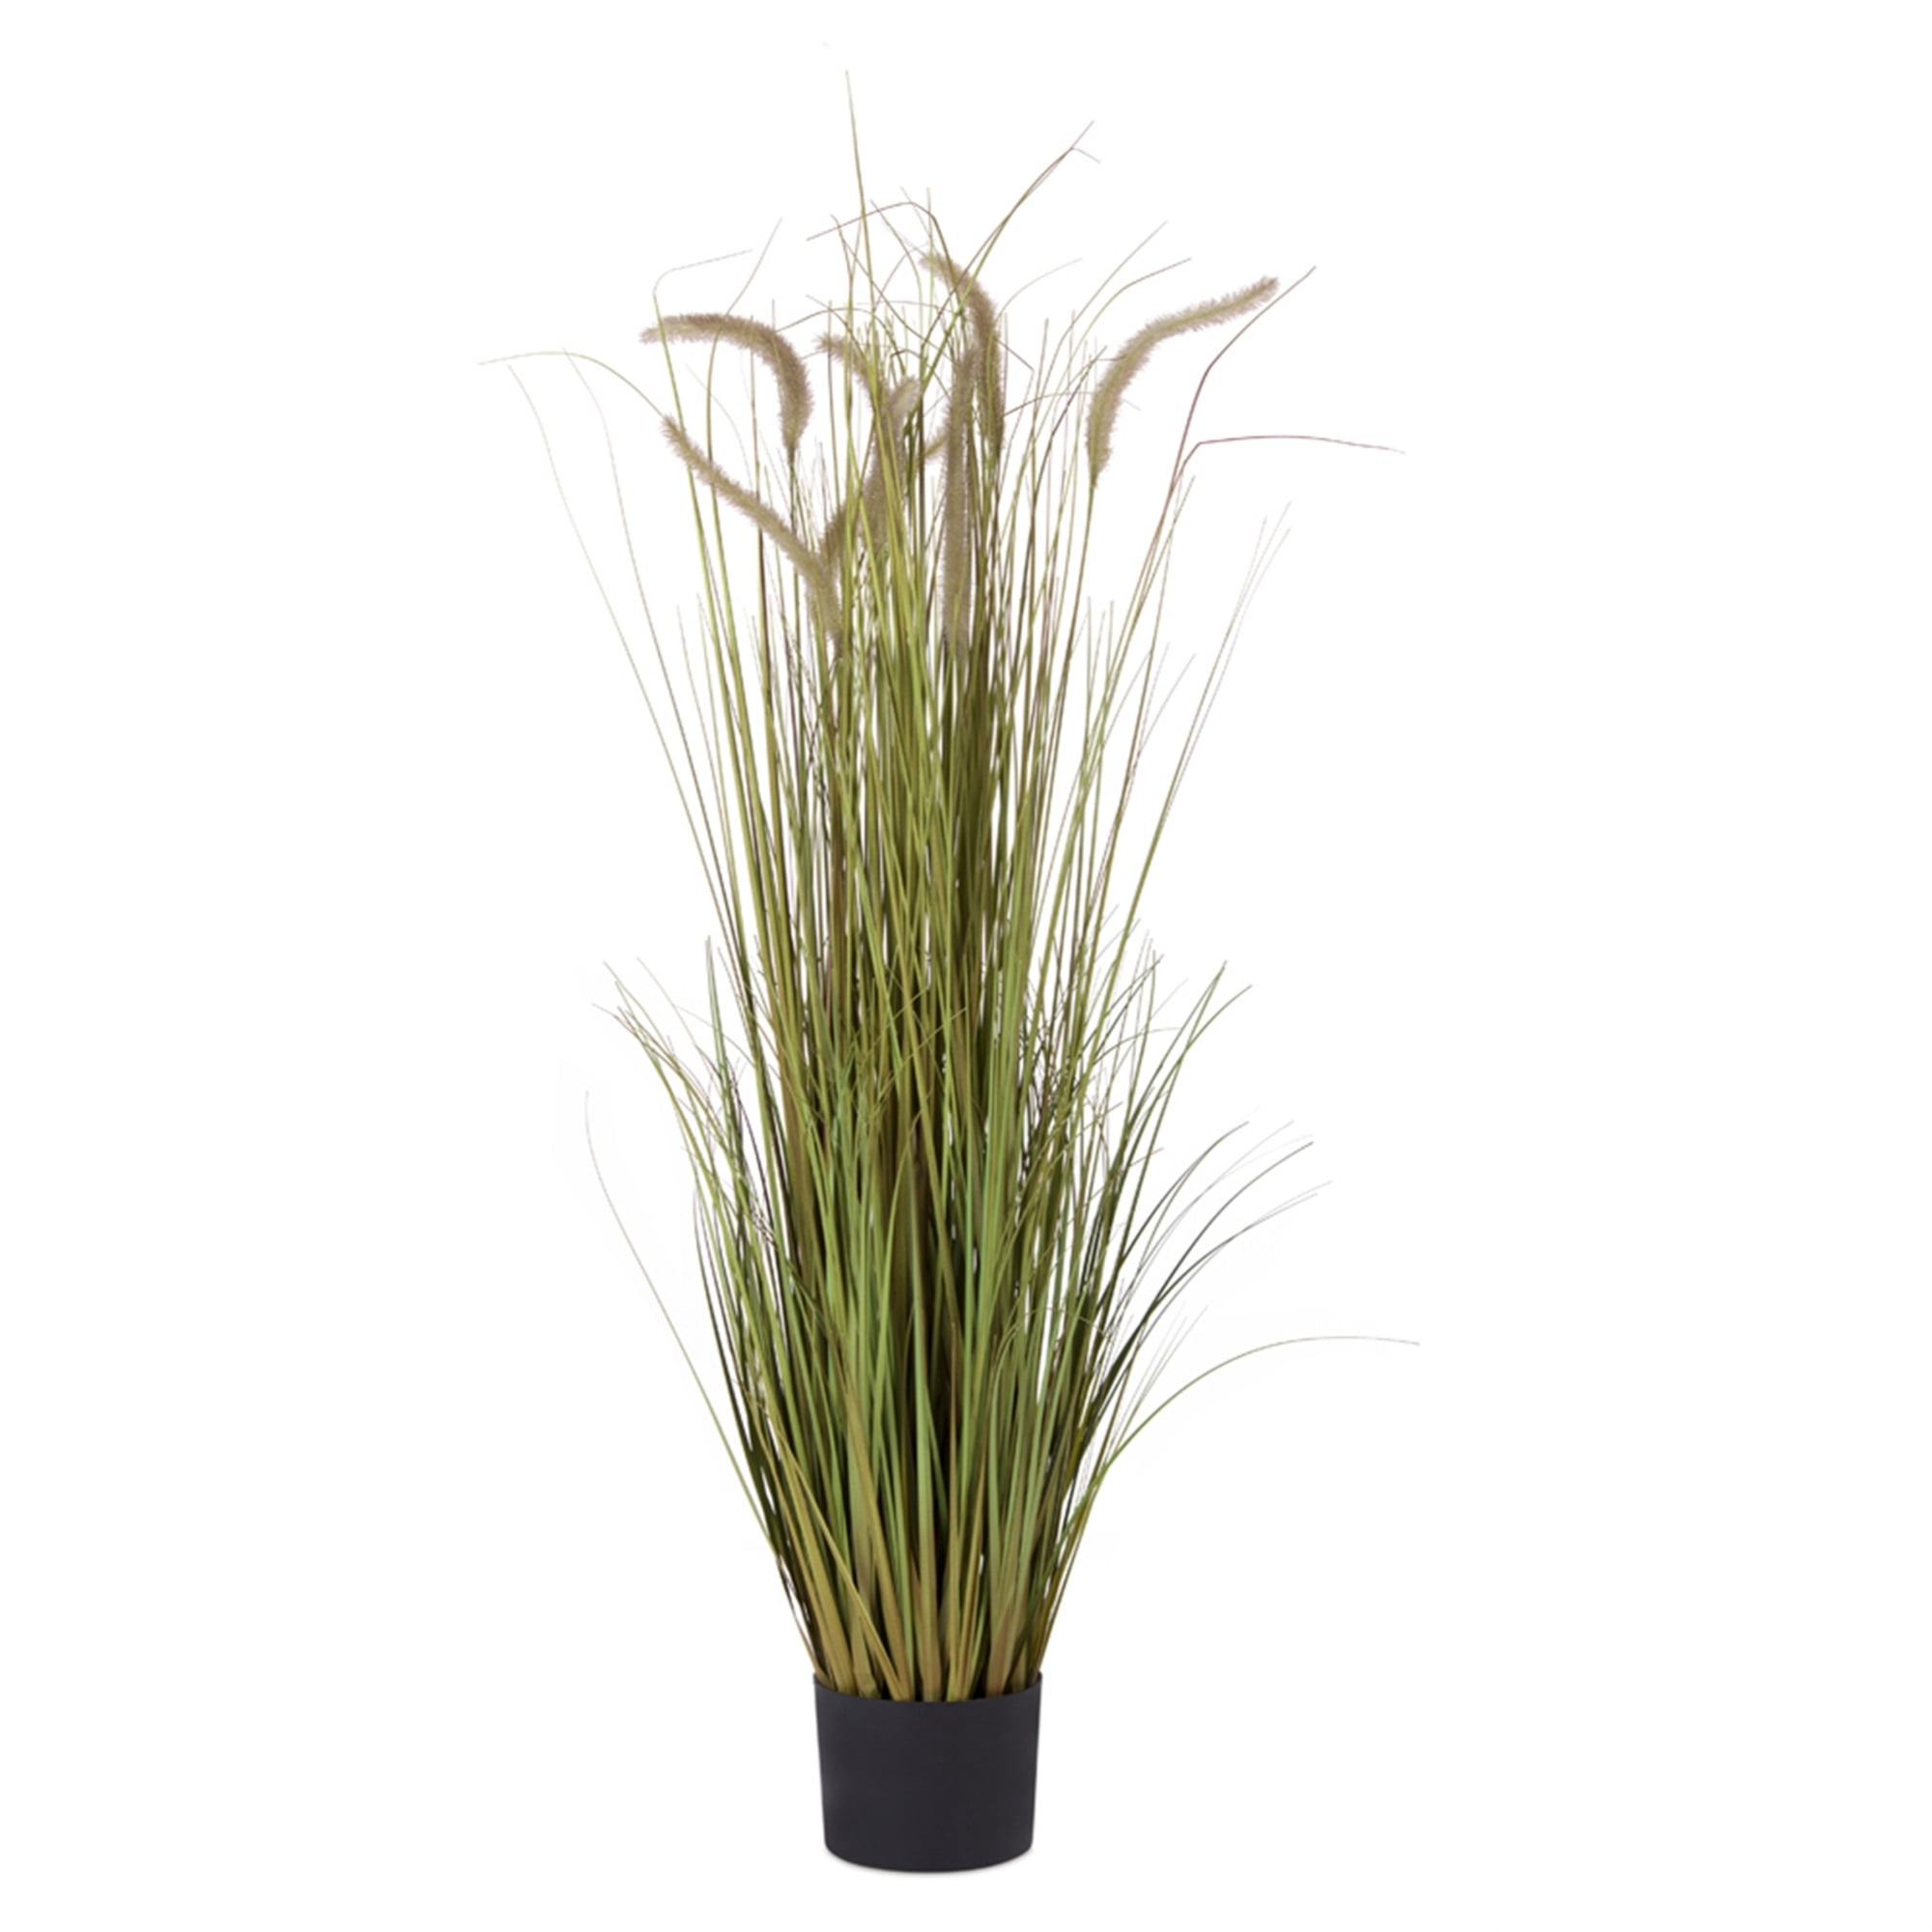 Potted Grass/Dogtail (Set of 2) 48"H PVC/Plastic